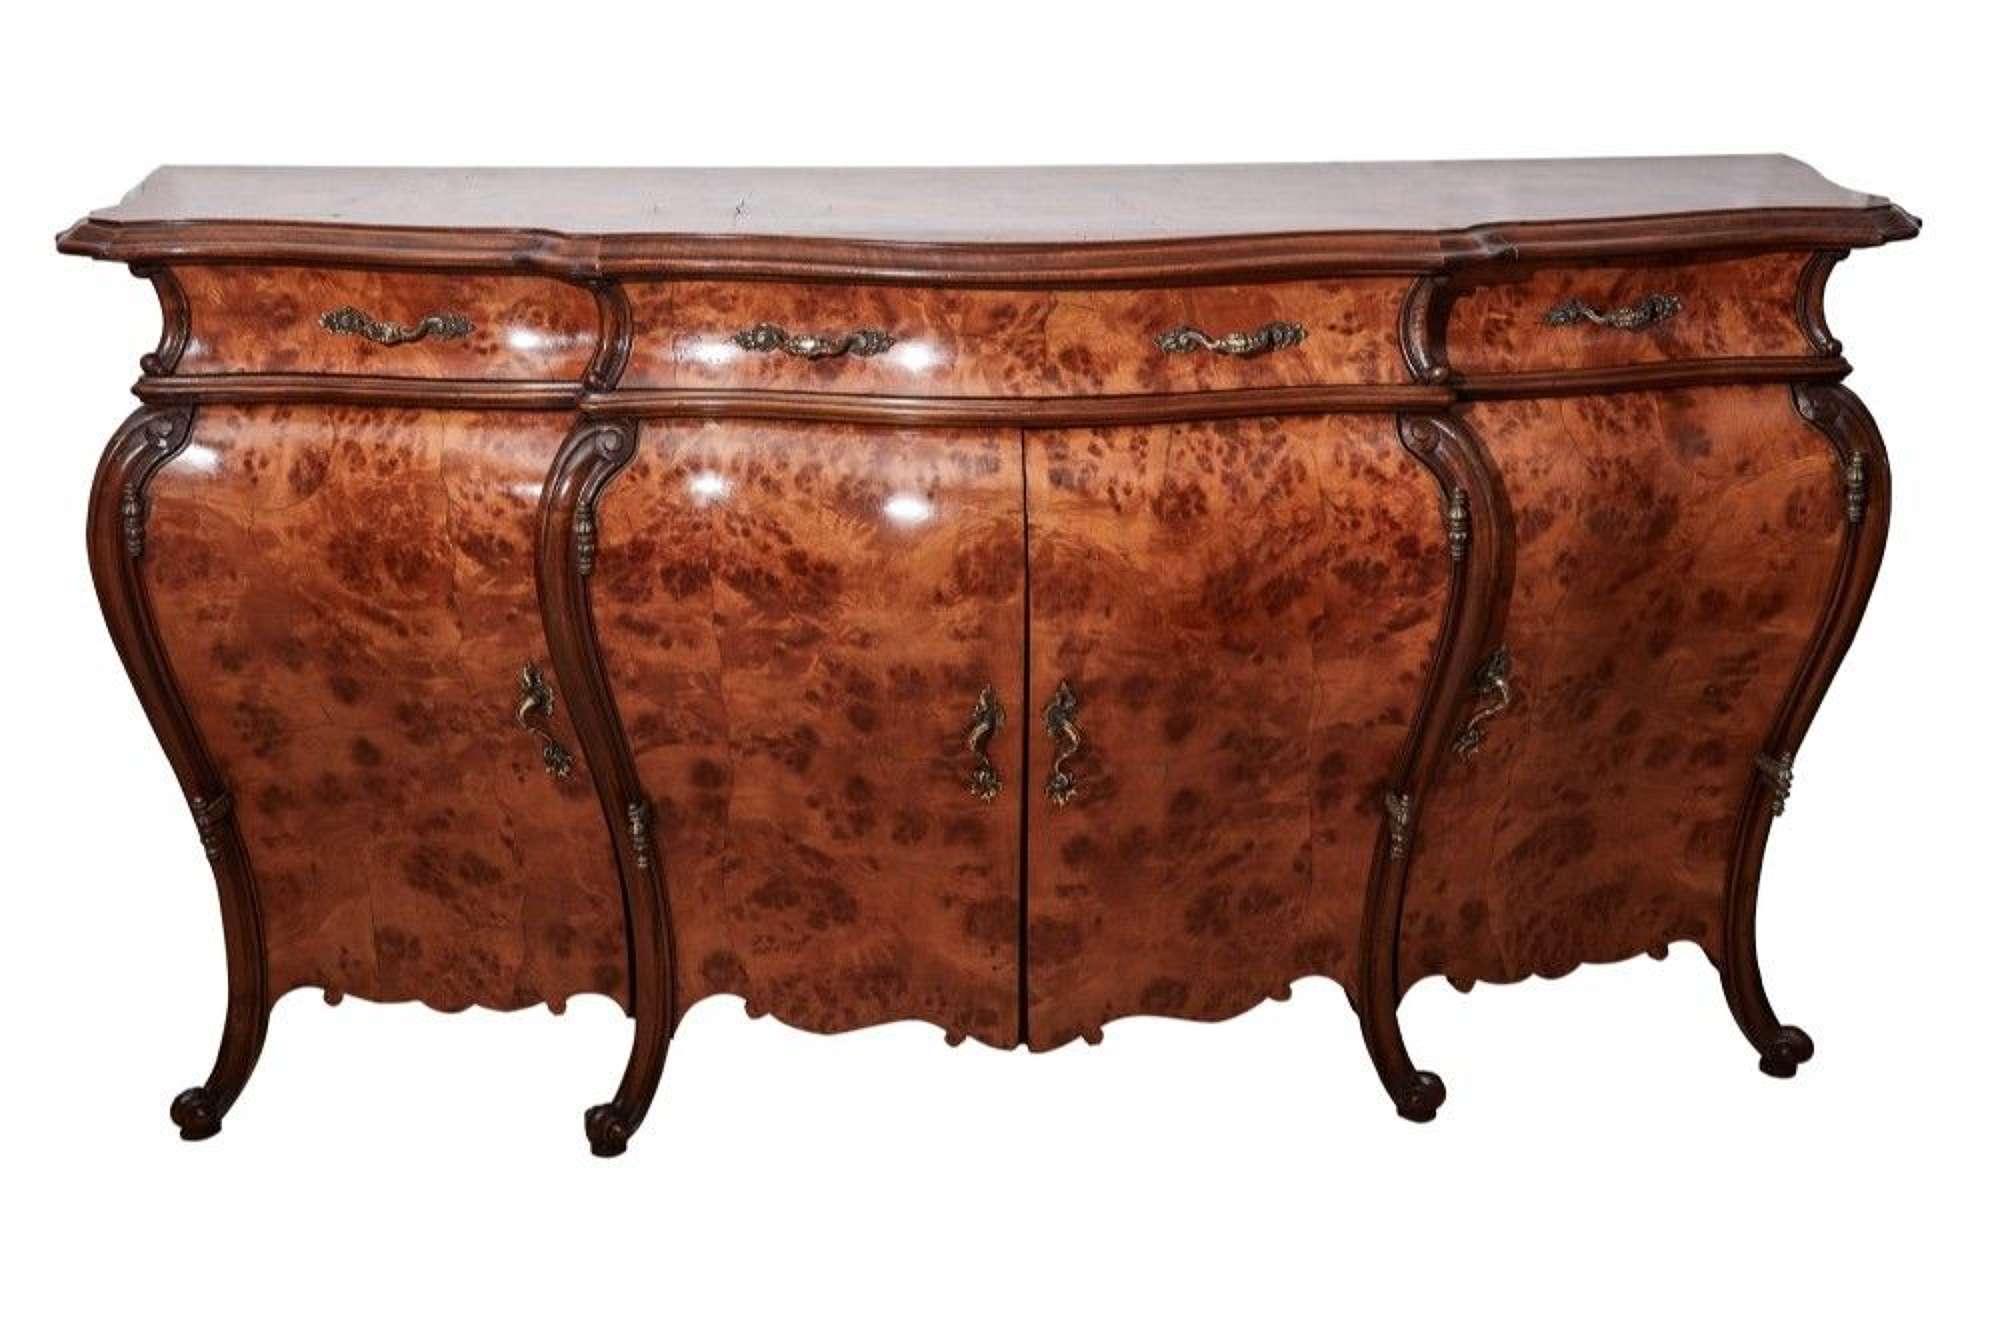 Magnificent Large Antique French Burr Walnut Bombe Shaped Sideboard